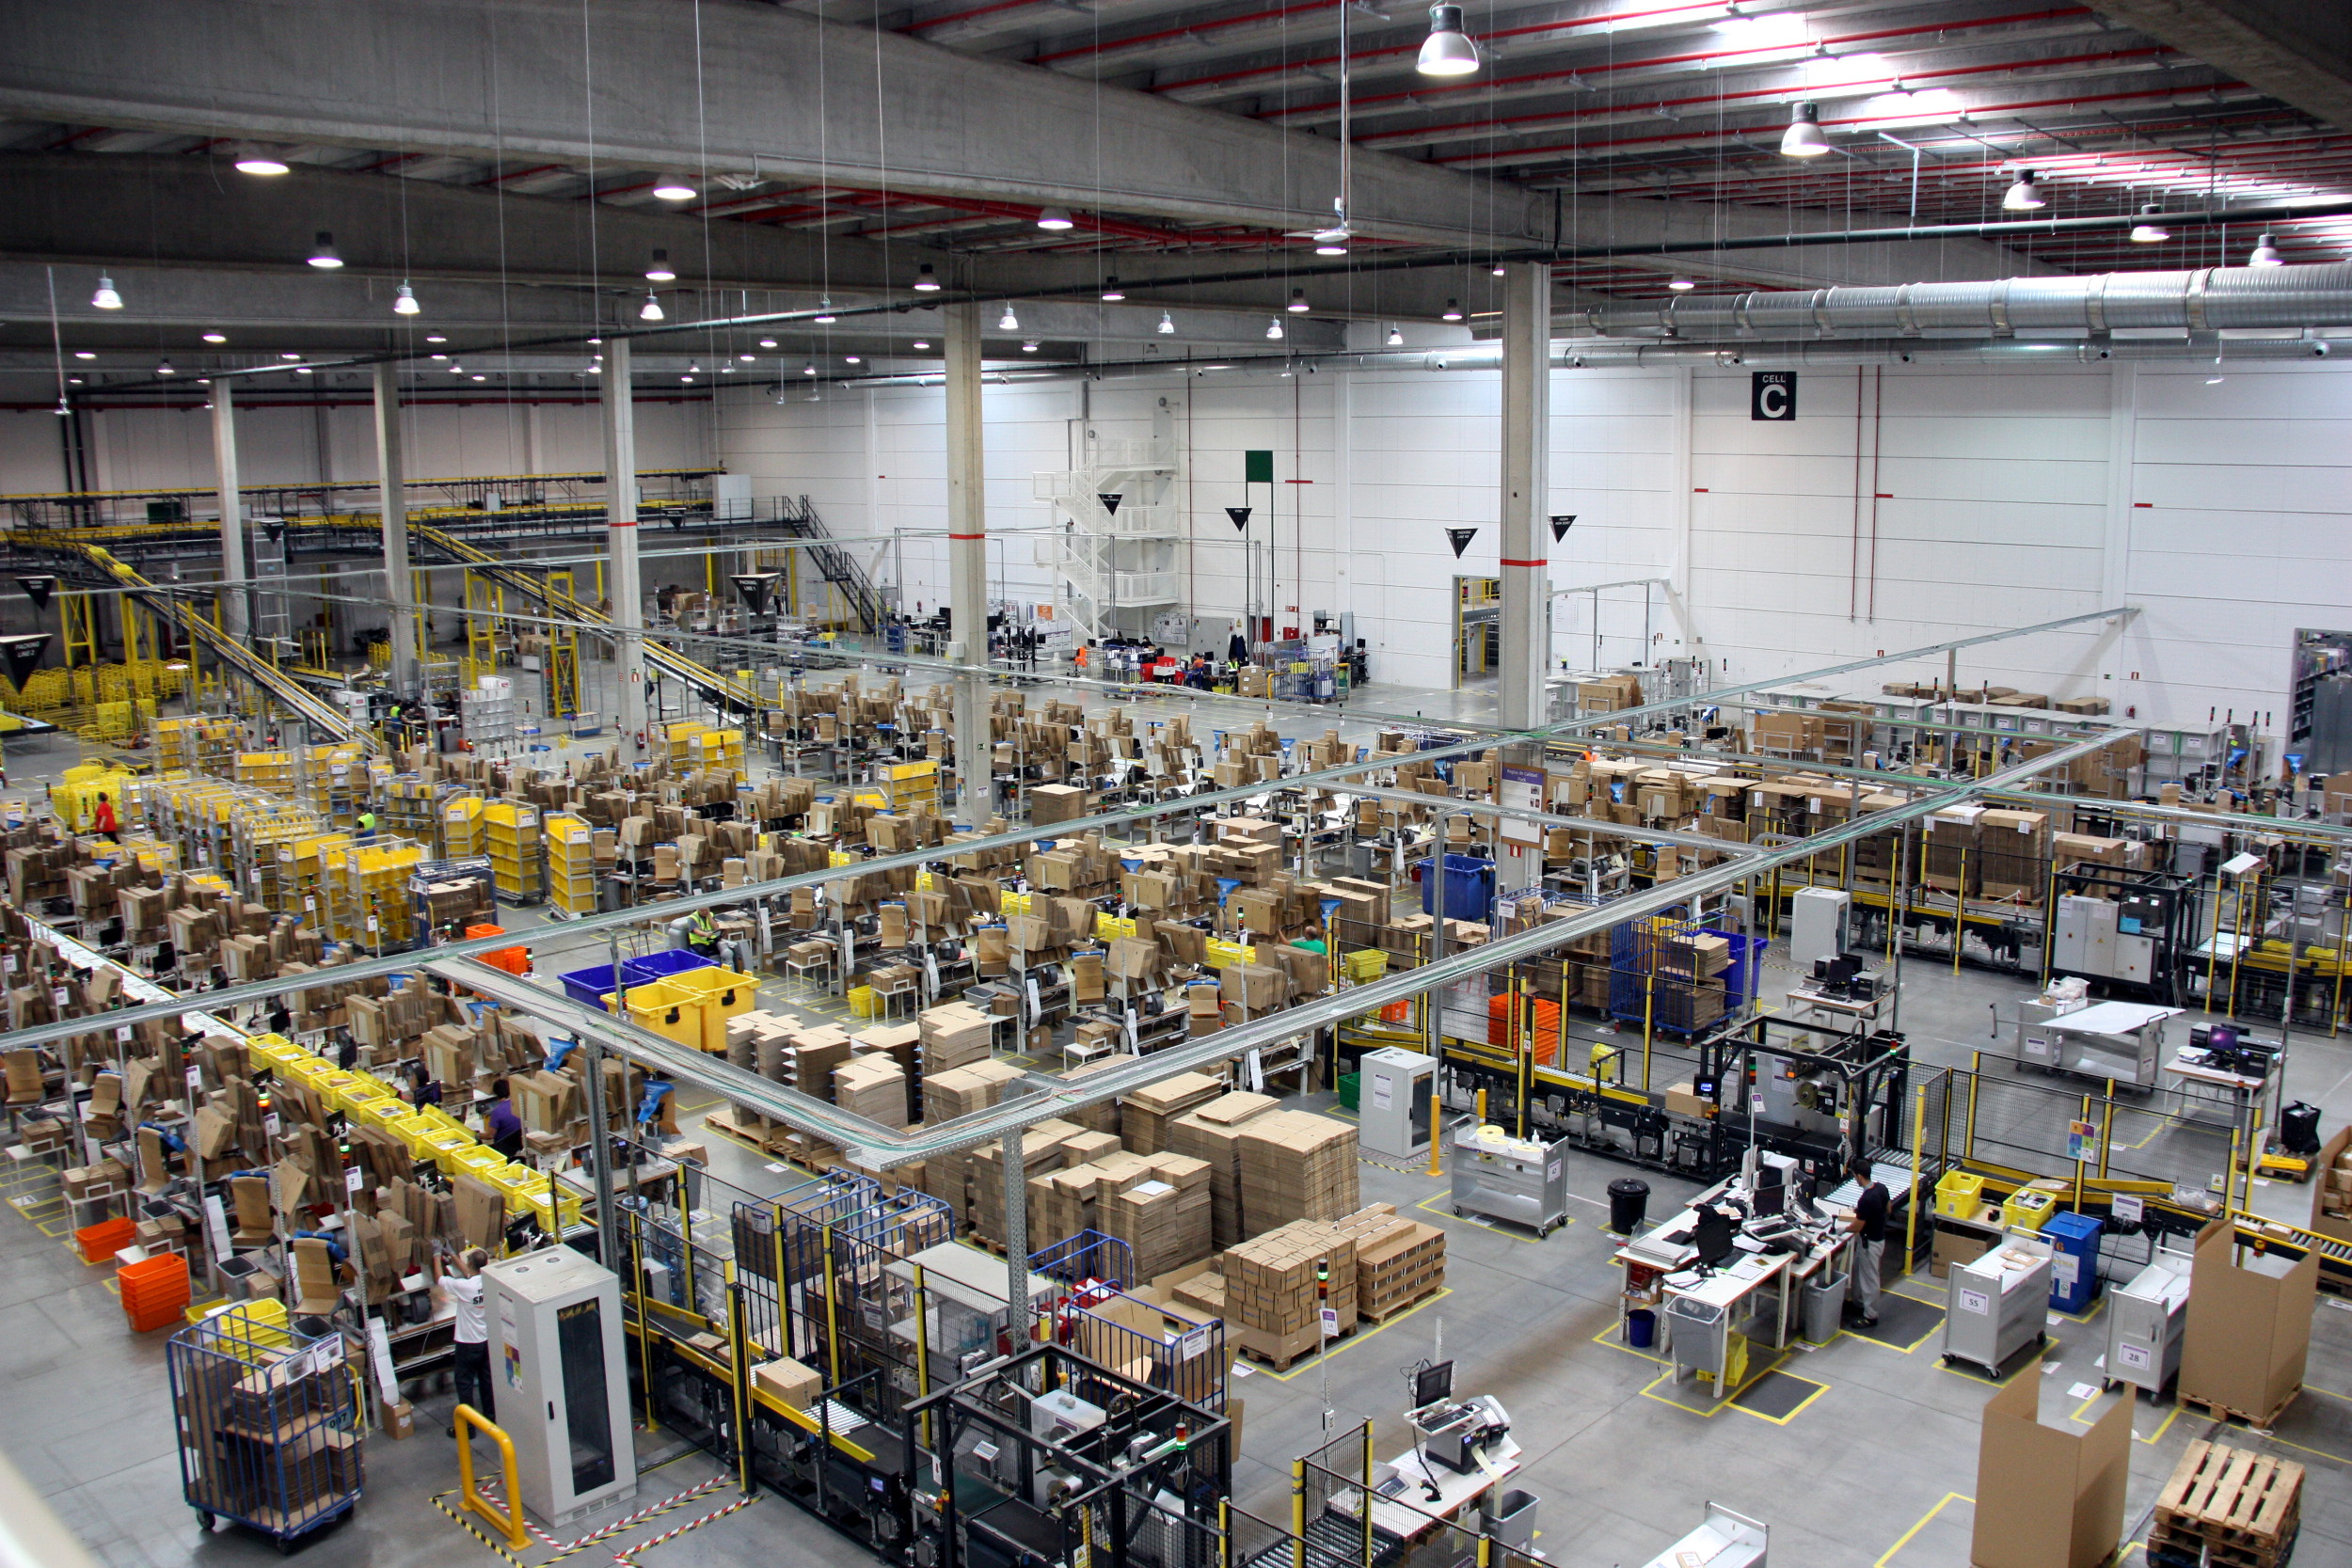 Image of Amazon's logistics centre (by ACN)